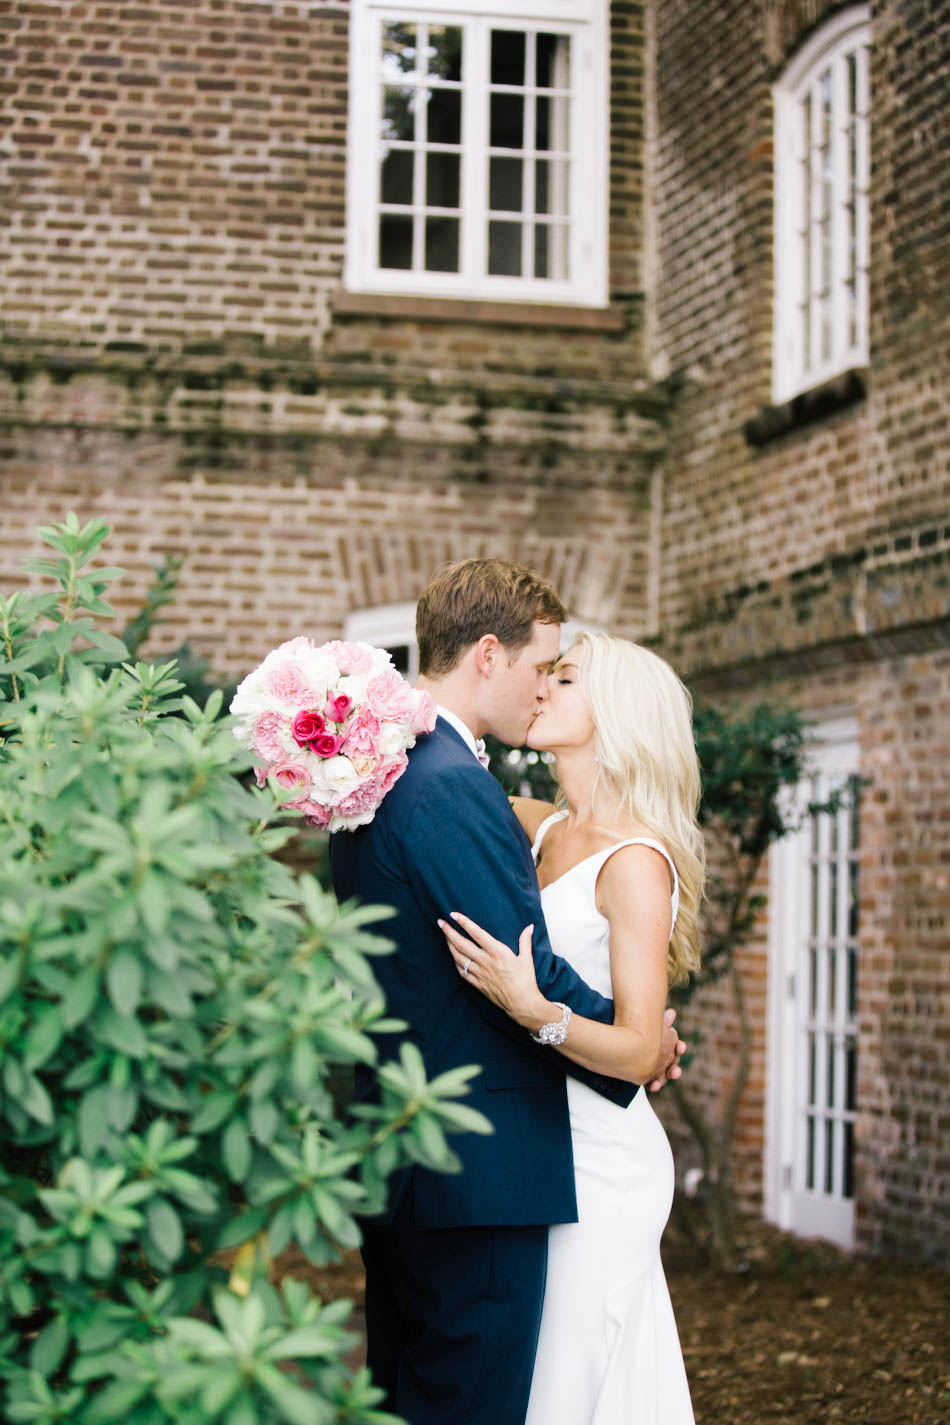 Bride and groom snuggle at the Rice Mill Building, Charleston, South Carolina Kate Timbers Photography. http://katetimbers.com #katetimbersphotography // Charleston Photography // Inspiration